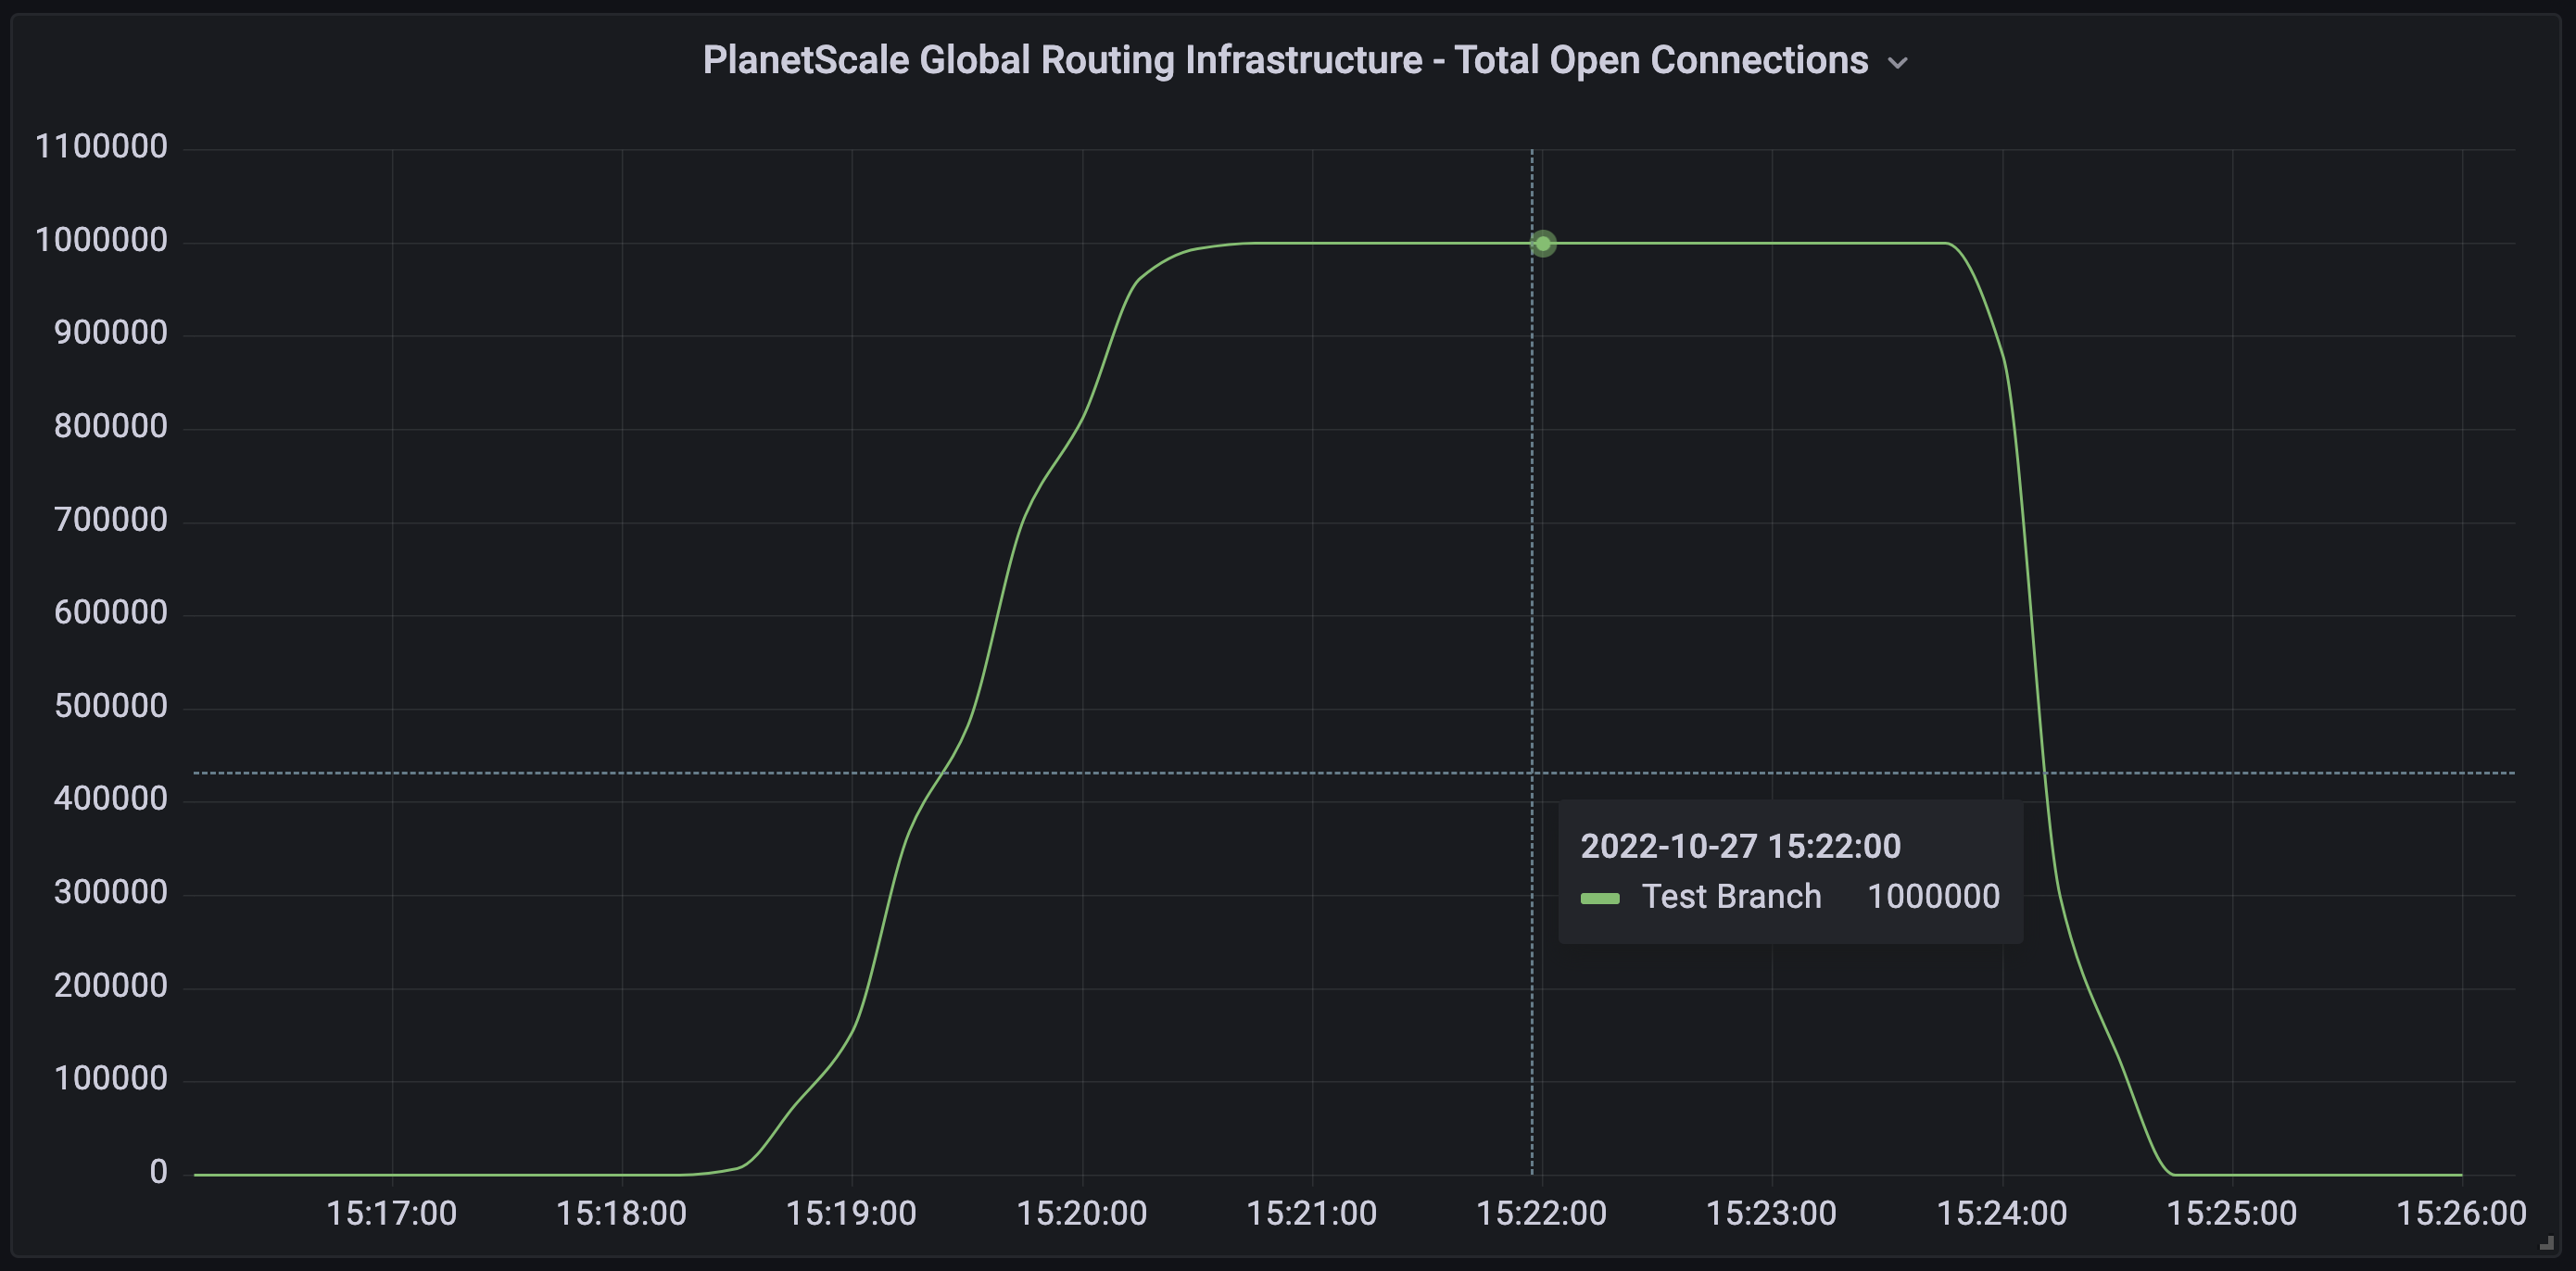 Graph showing total open connections rising from 0 to one million in 2 minutes, holding steady for 5 minutes, and dropping back down to 0